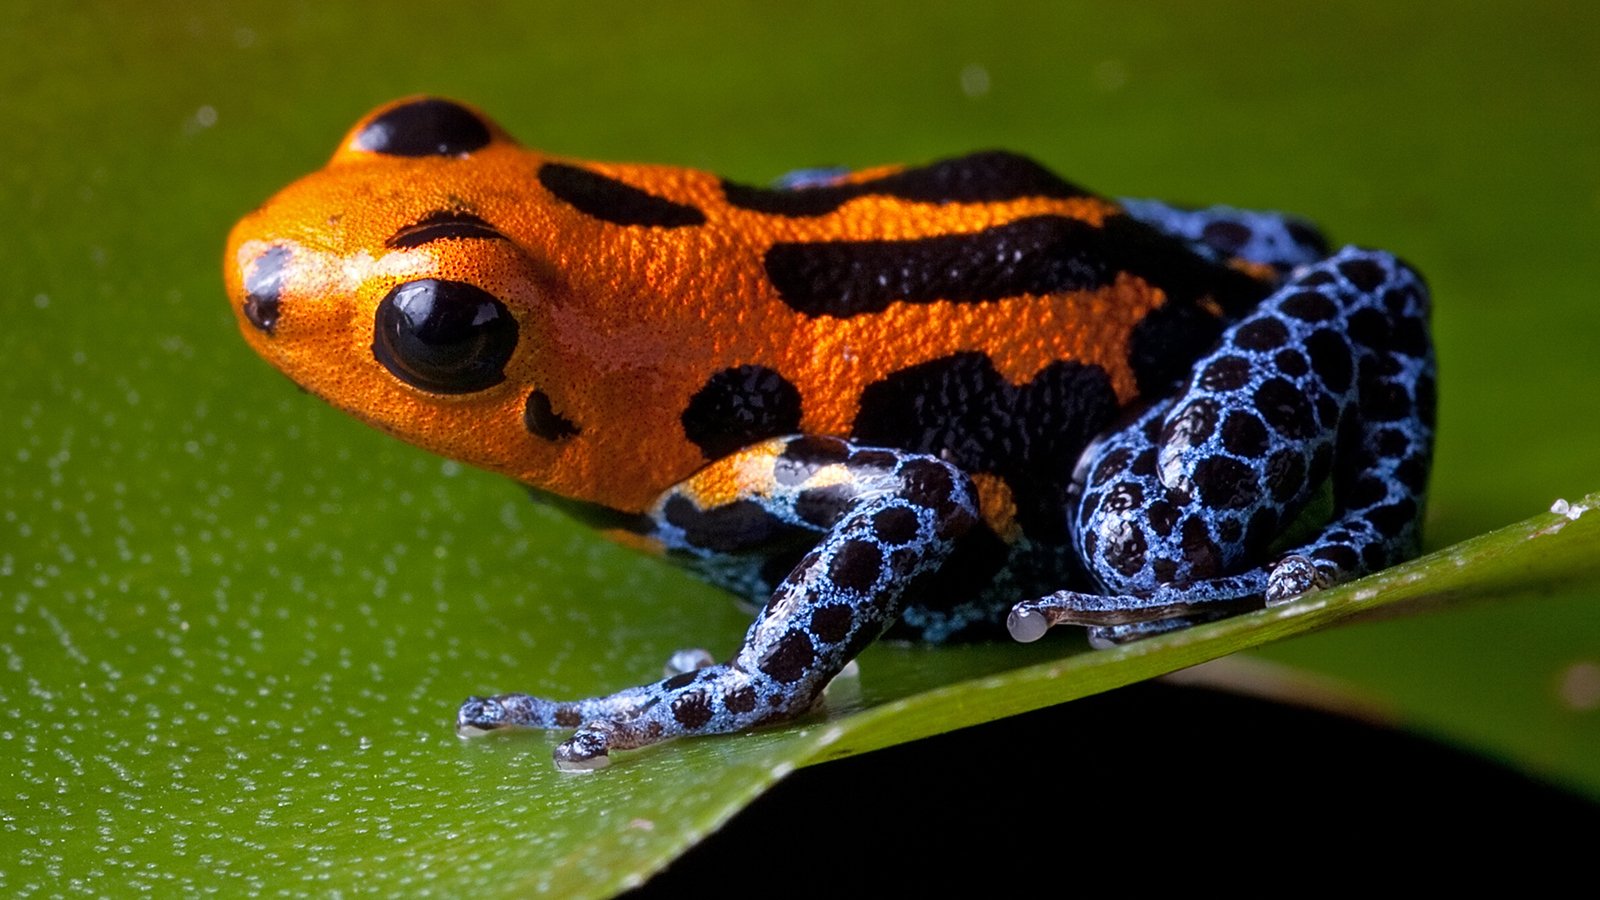 There is also another type of poison dart frog which is called the blue jeans frog it has a red body with blue legs